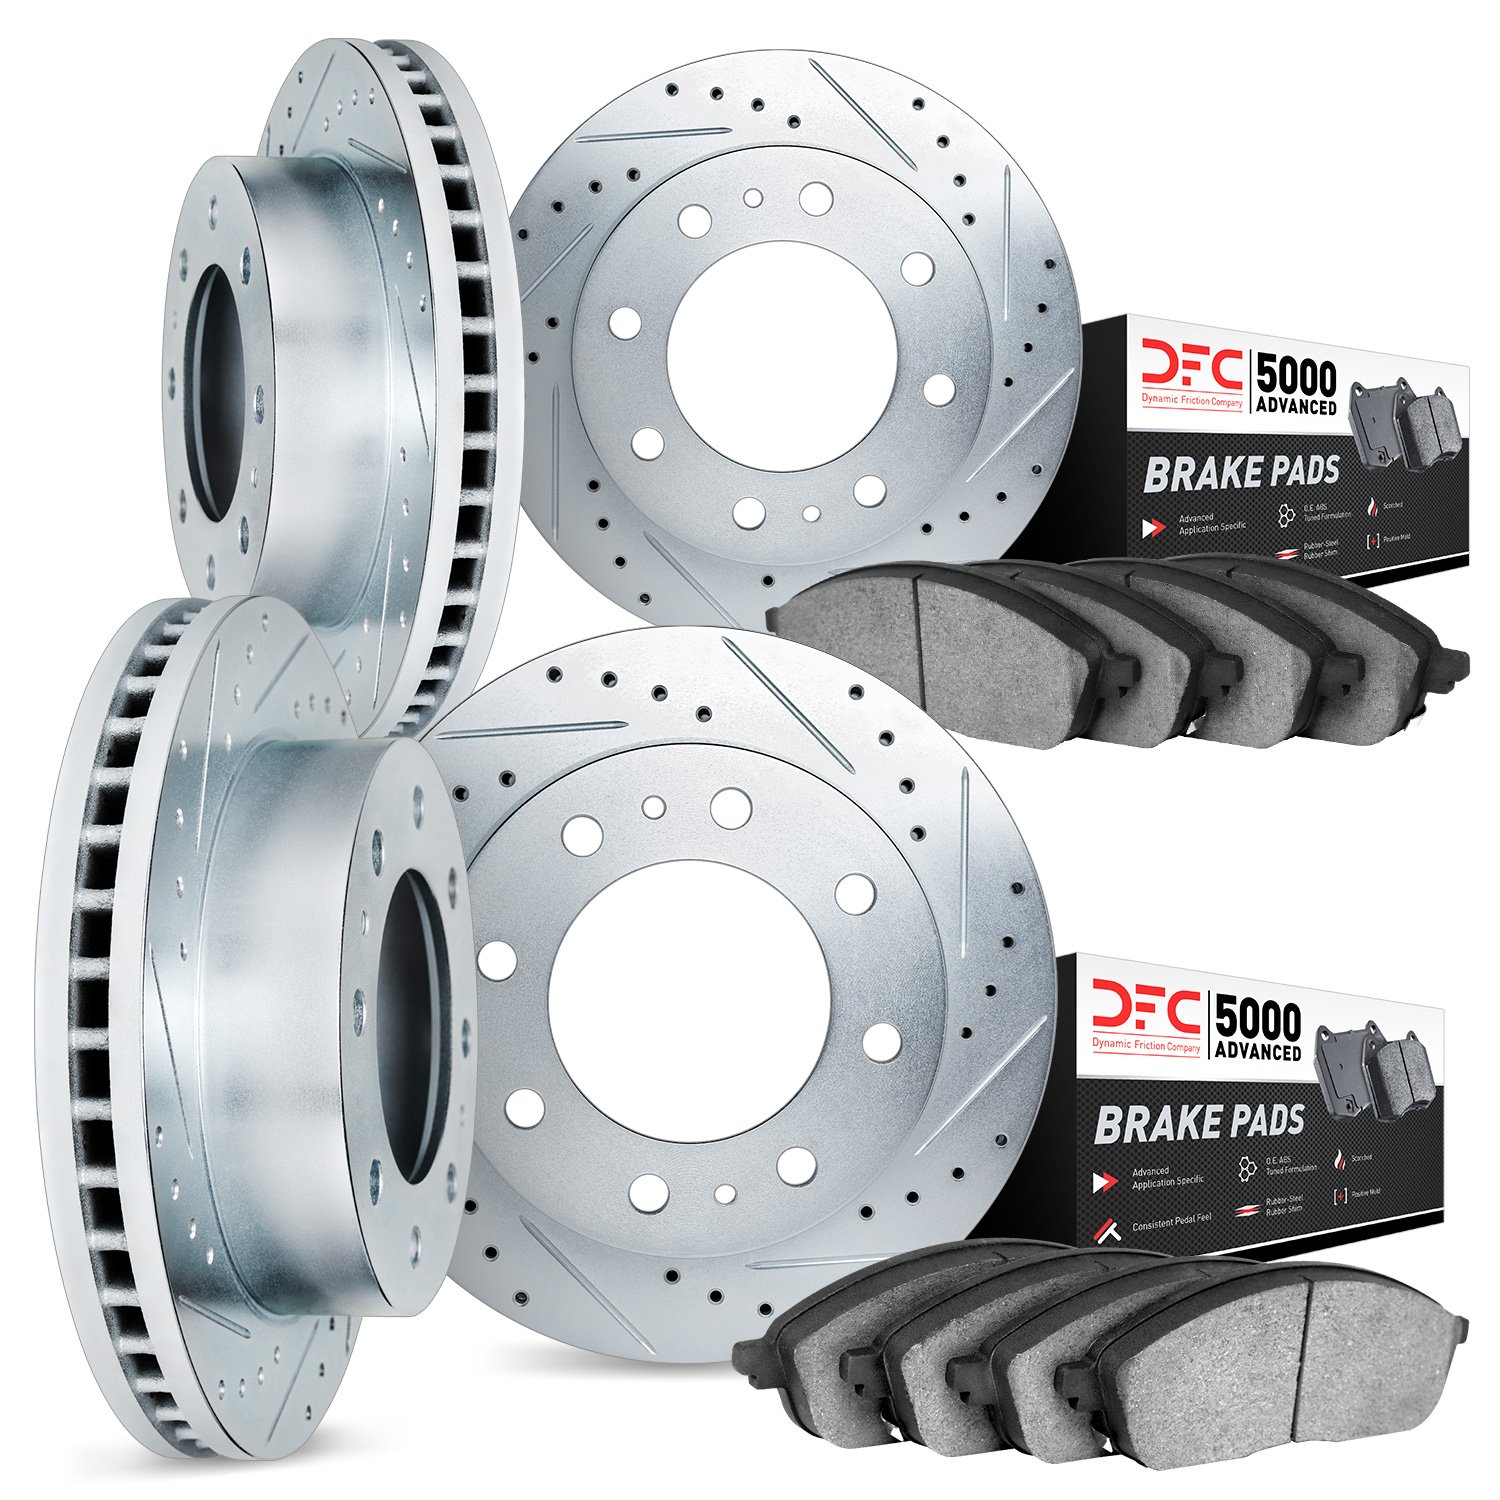 7504-54371 Drilled/Slotted Brake Rotors w/5000 Advanced Brake Pads Kit [Silver], 2005-2007 Ford/Lincoln/Mercury/Mazda, Position: